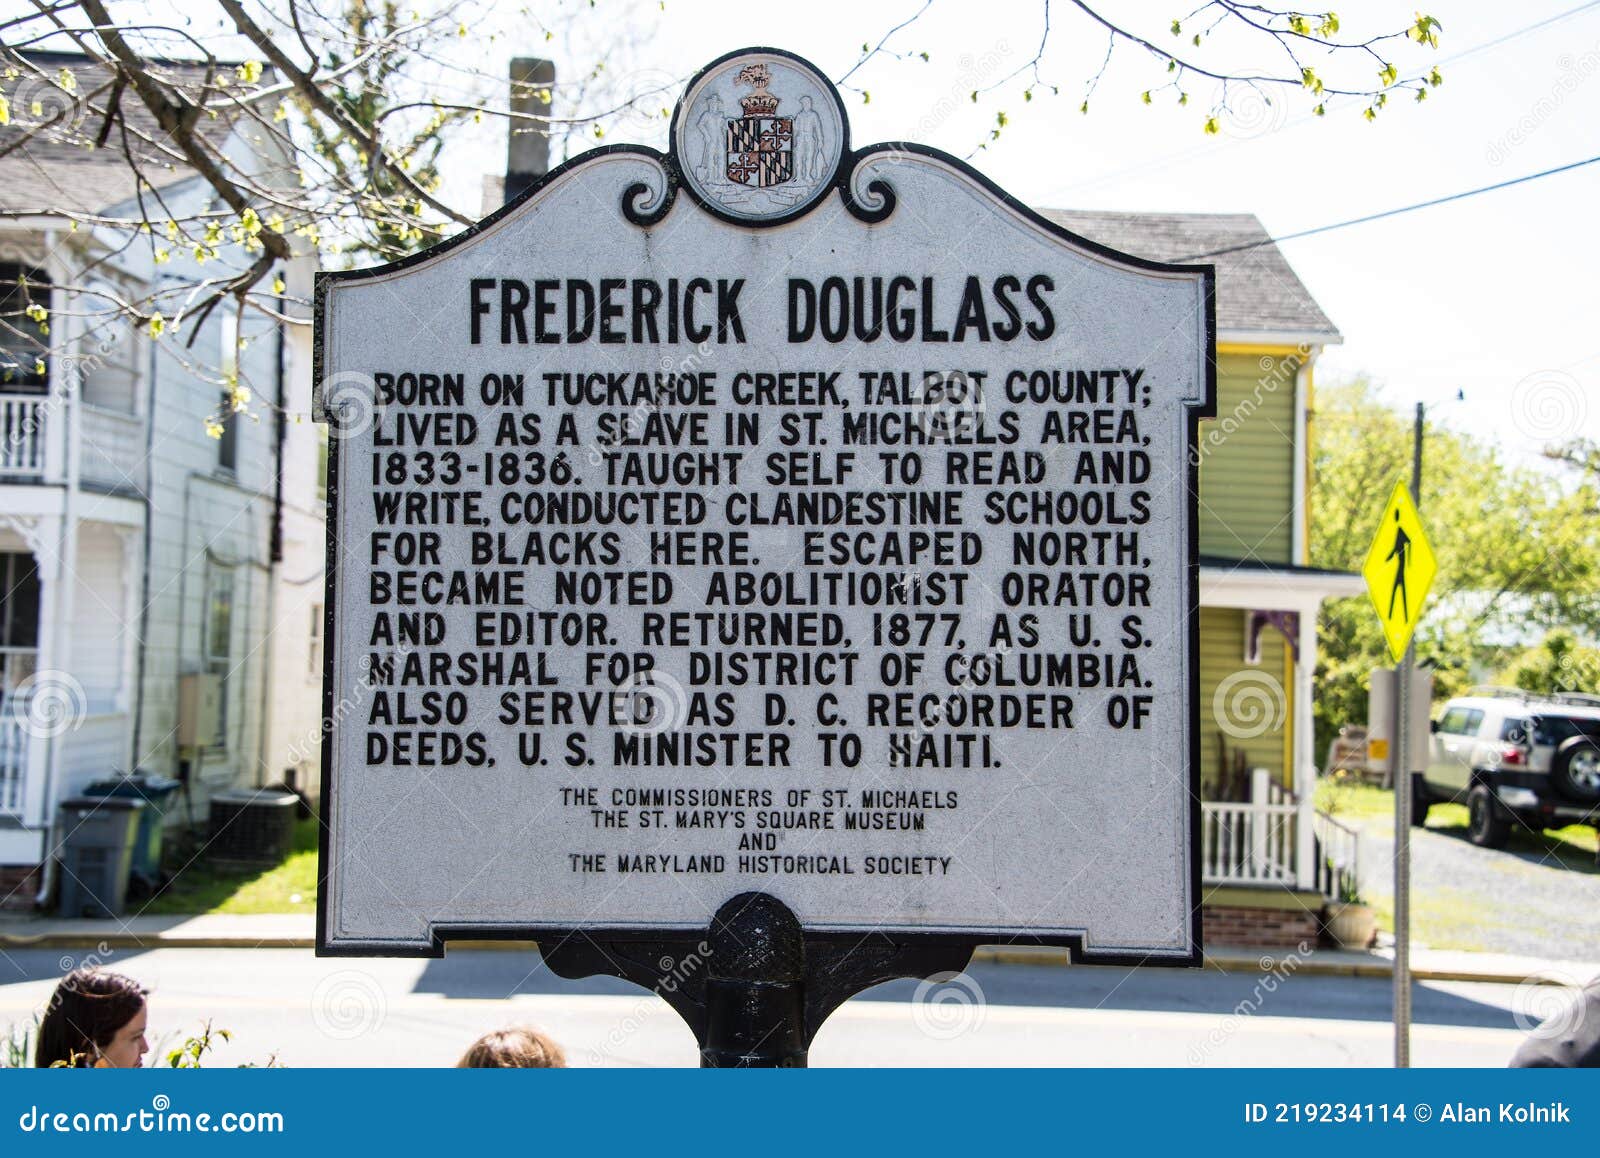 plaque honoring frederick douglass in st. michael`s, talbot county, maryland, usa